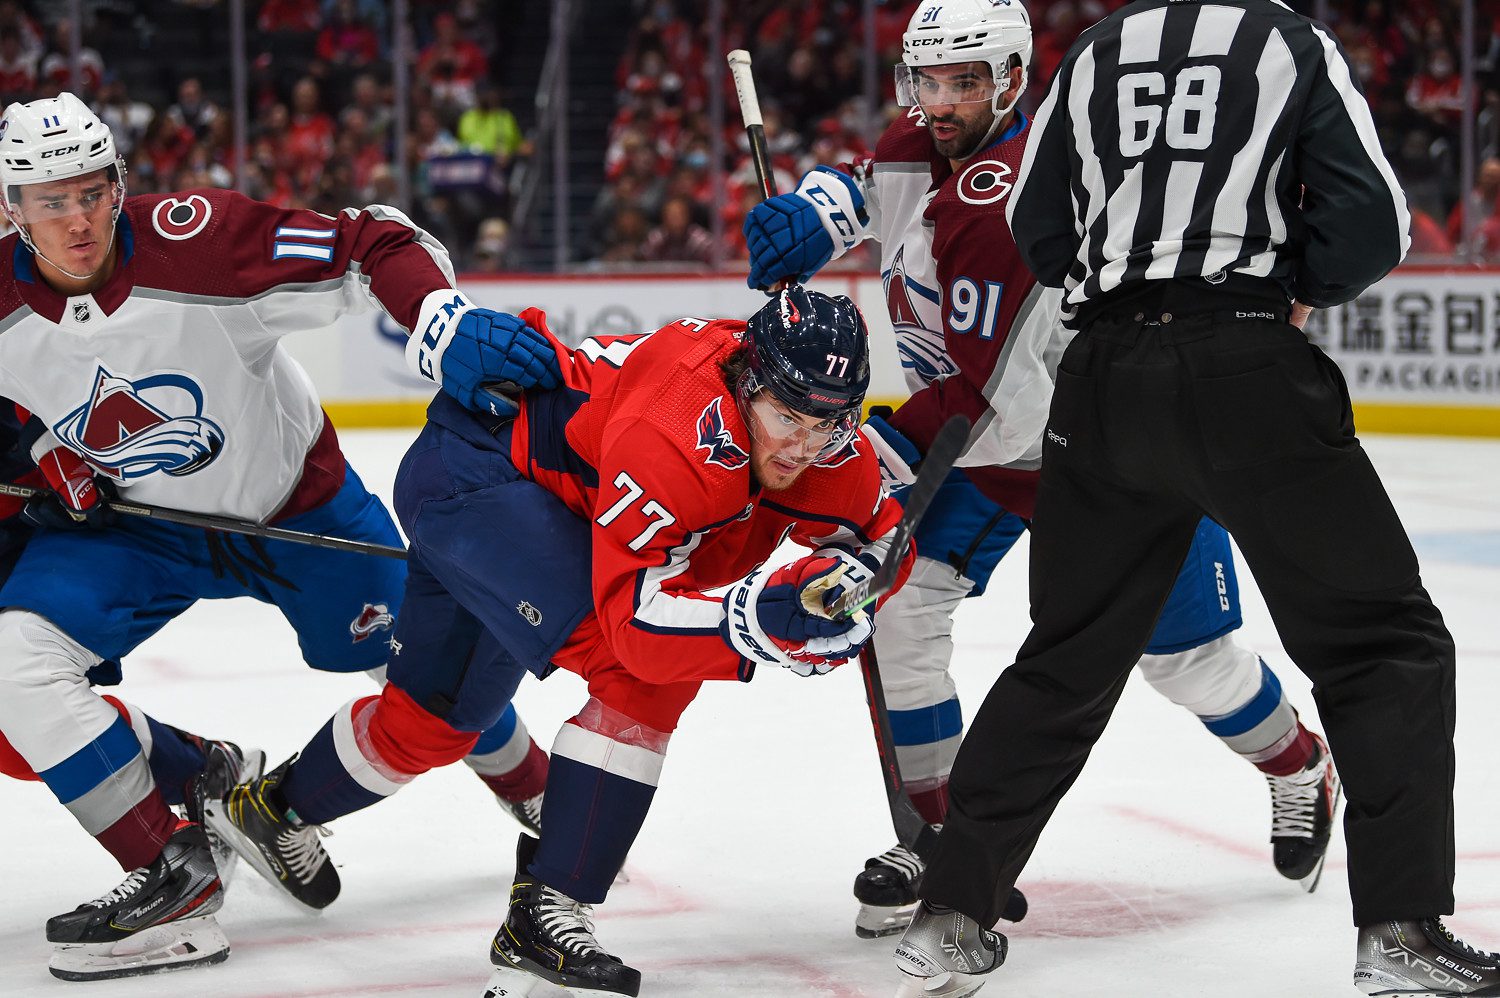 NHL Free Agency - Nazem Kadri of the Colorado Avalanche battles for the puck with the Washington Capitals' T.J. Oshie (Image: All-Pro Reels)